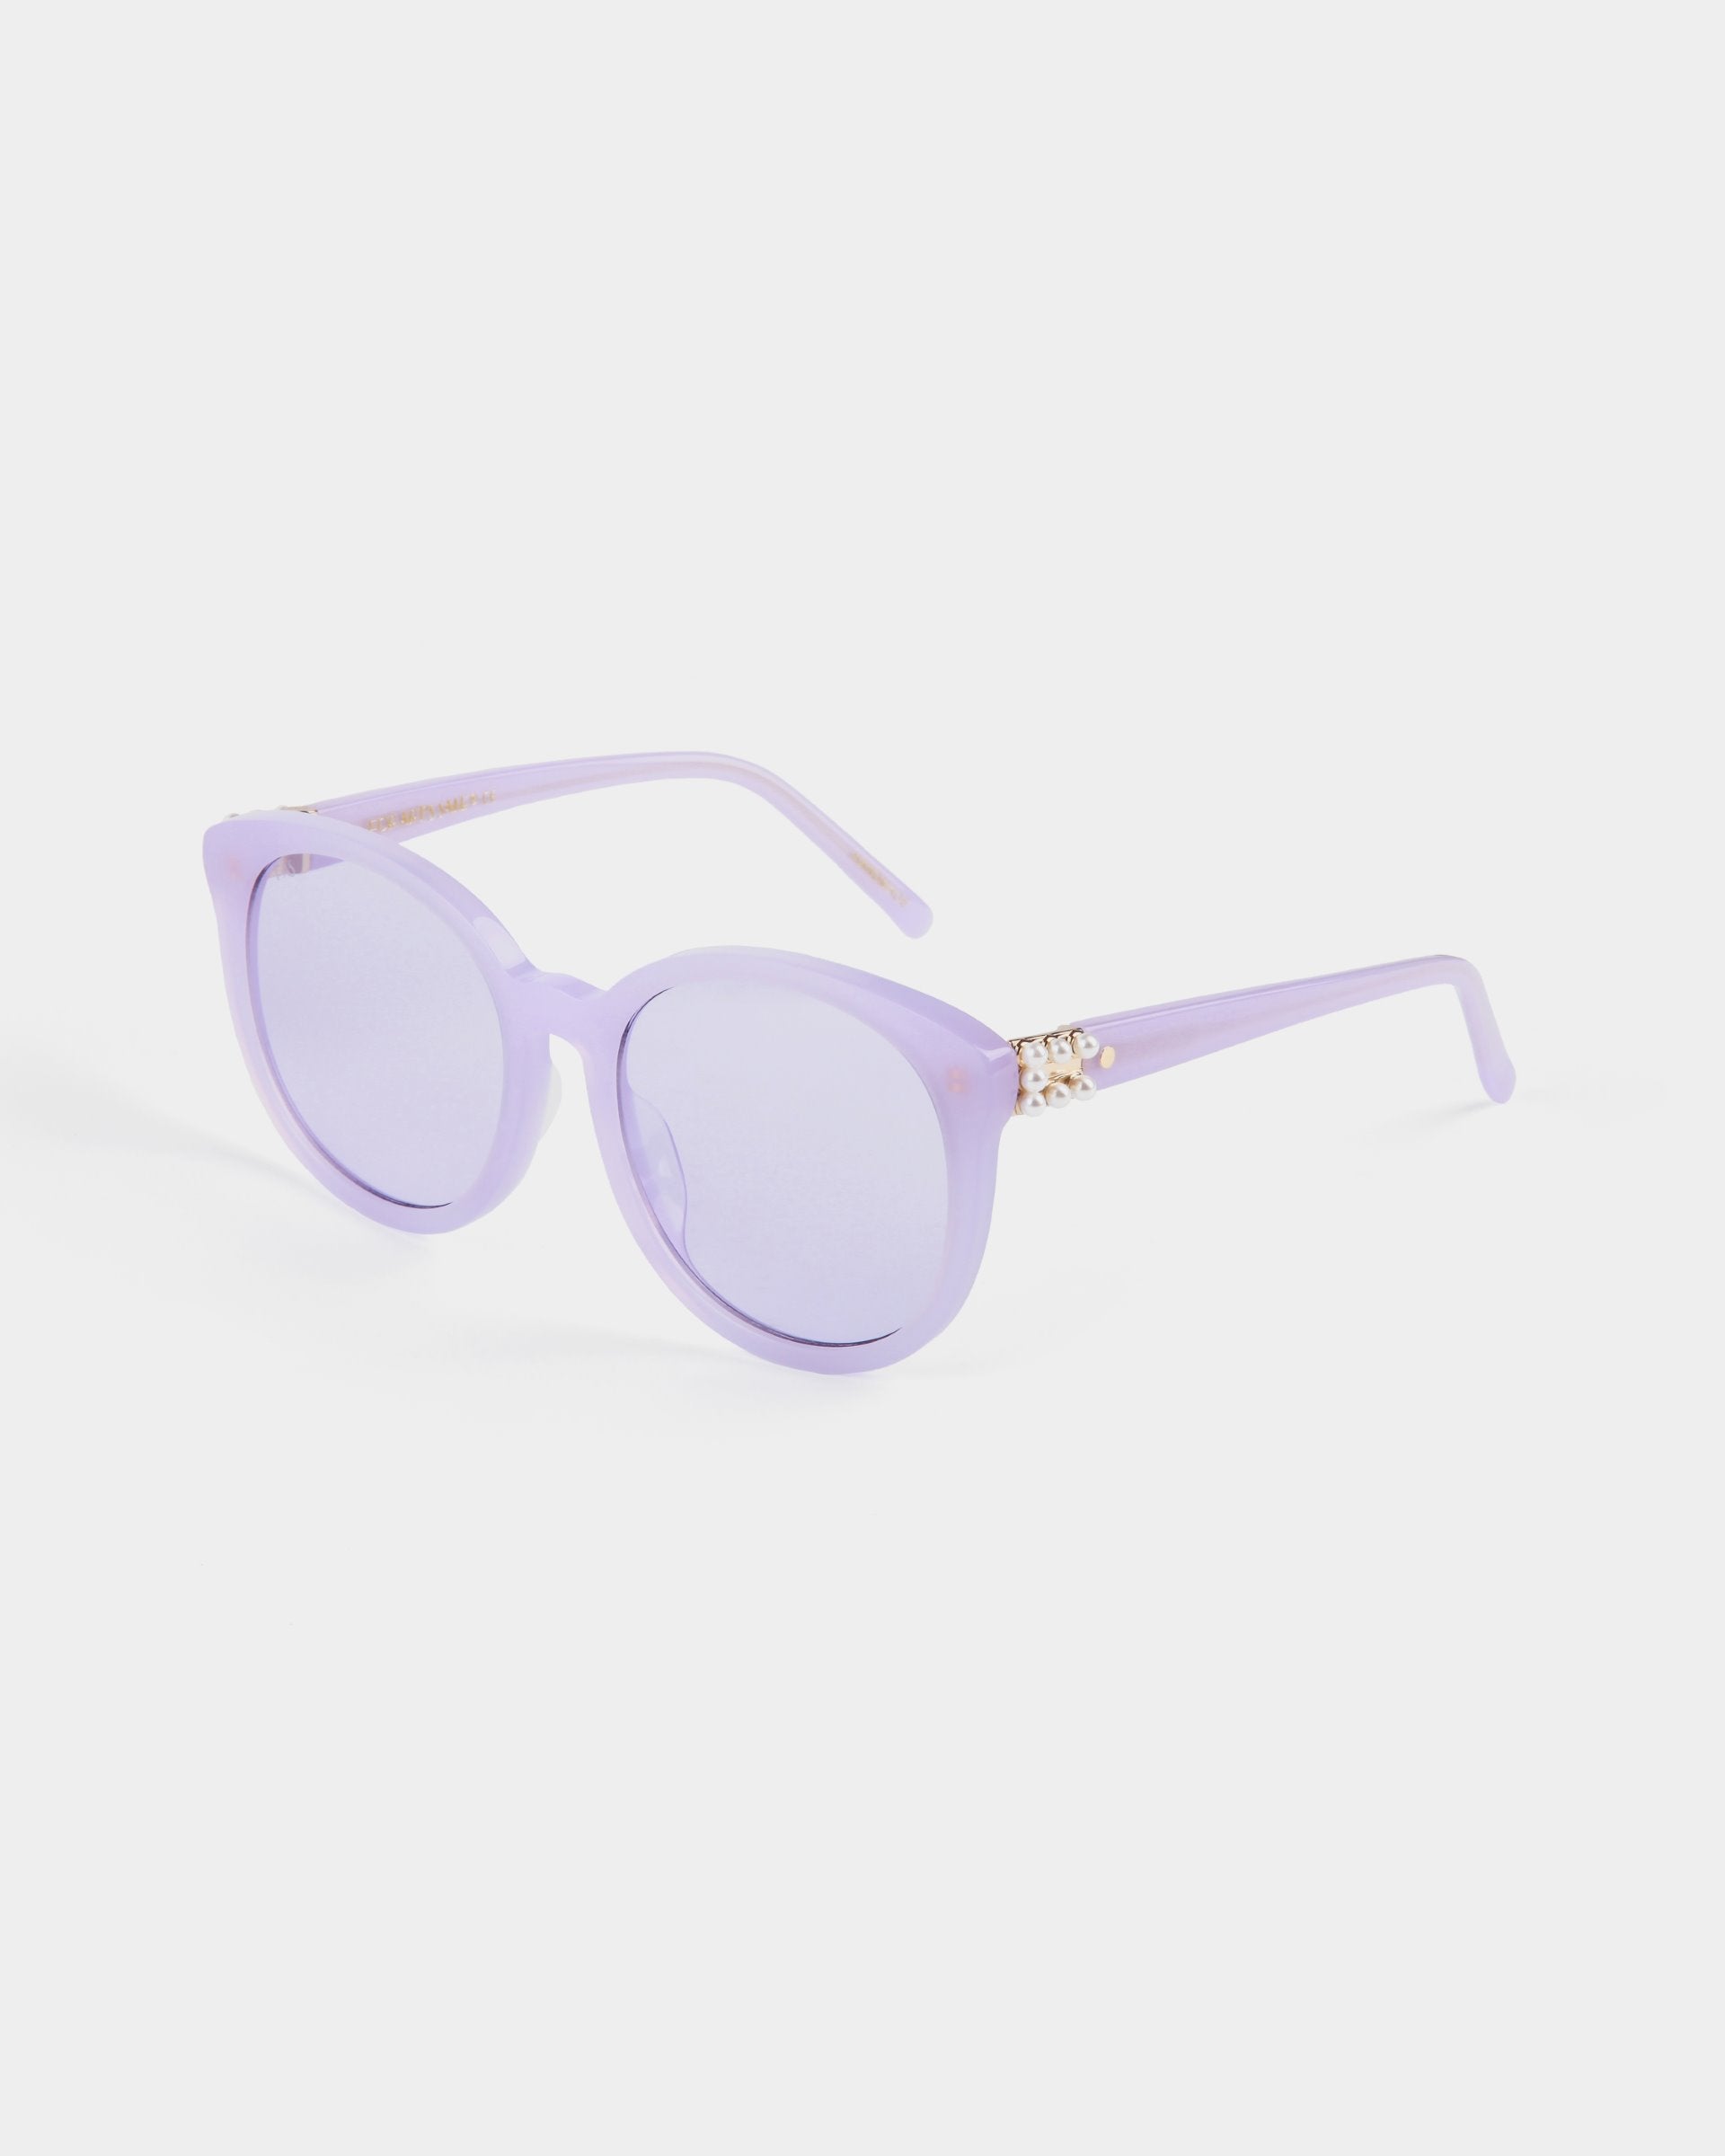 A pair of round lavender Scarlett frames with purple-tinted, shatter-resistant nylon lenses and gold accents on the temples from For Art's Sake®. The glasses feature UVA & UVB-protected lenses and are positioned against a plain white background.